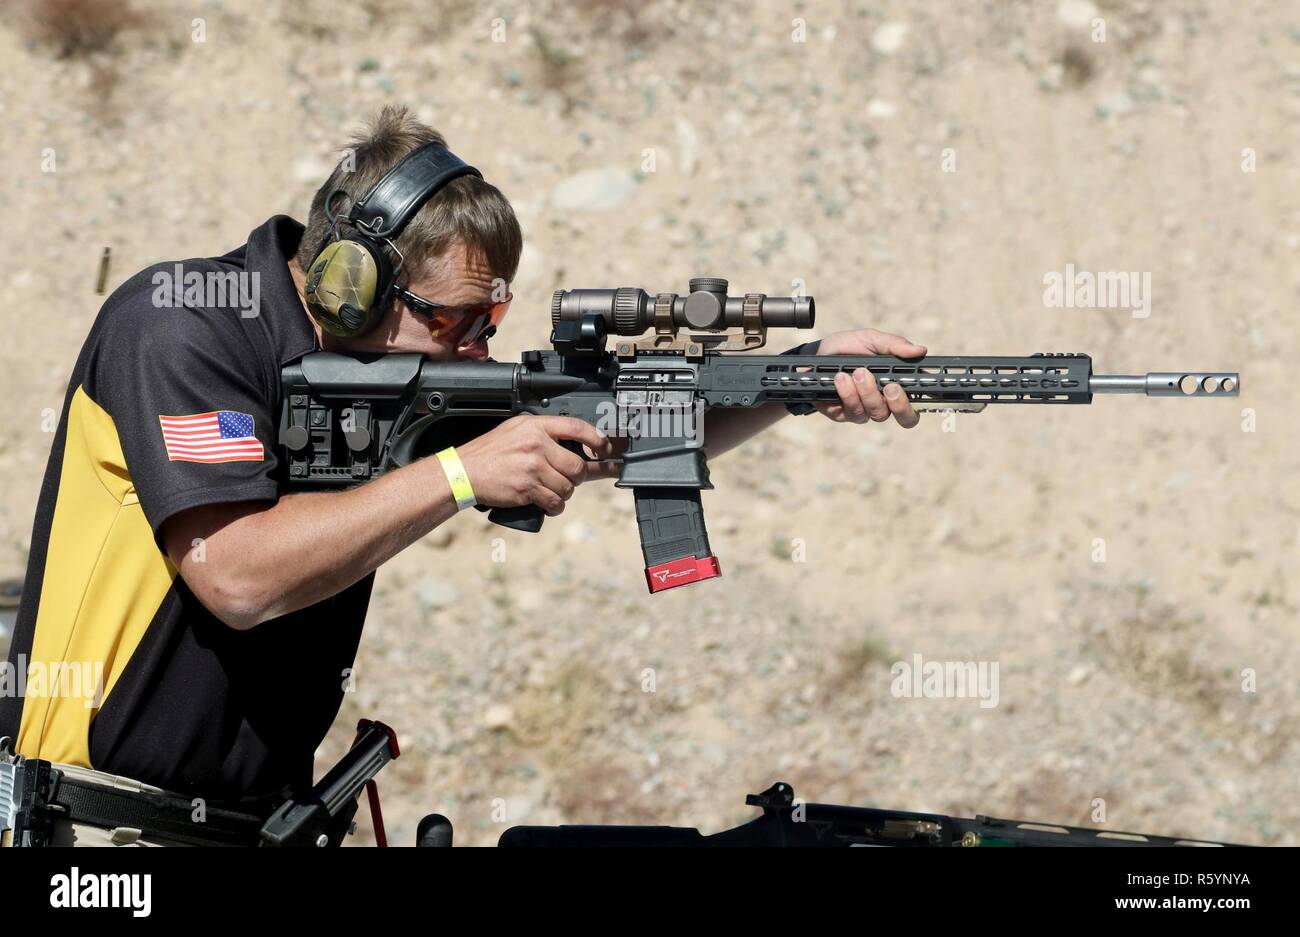 staff-sgt-joel-turner-an-anderson-sc-native-and-competitive-shooting-soldier-with-the-us-army-marksmanship-unit-fires-his-rifle-during-the-2017-us-practical-shooting-association-multi-gun-nationals-in-las-vegas-nevada-on-april-15-after-the-three-day-competition-that-included-14-different-stages-and-79-other-competitors-turner-clenched-the-second-place-title-in-the-open-division-turner-trailed-the-five-time-world-record-holder-jerry-miculek-by-94499-points-R5YNYA.jpg